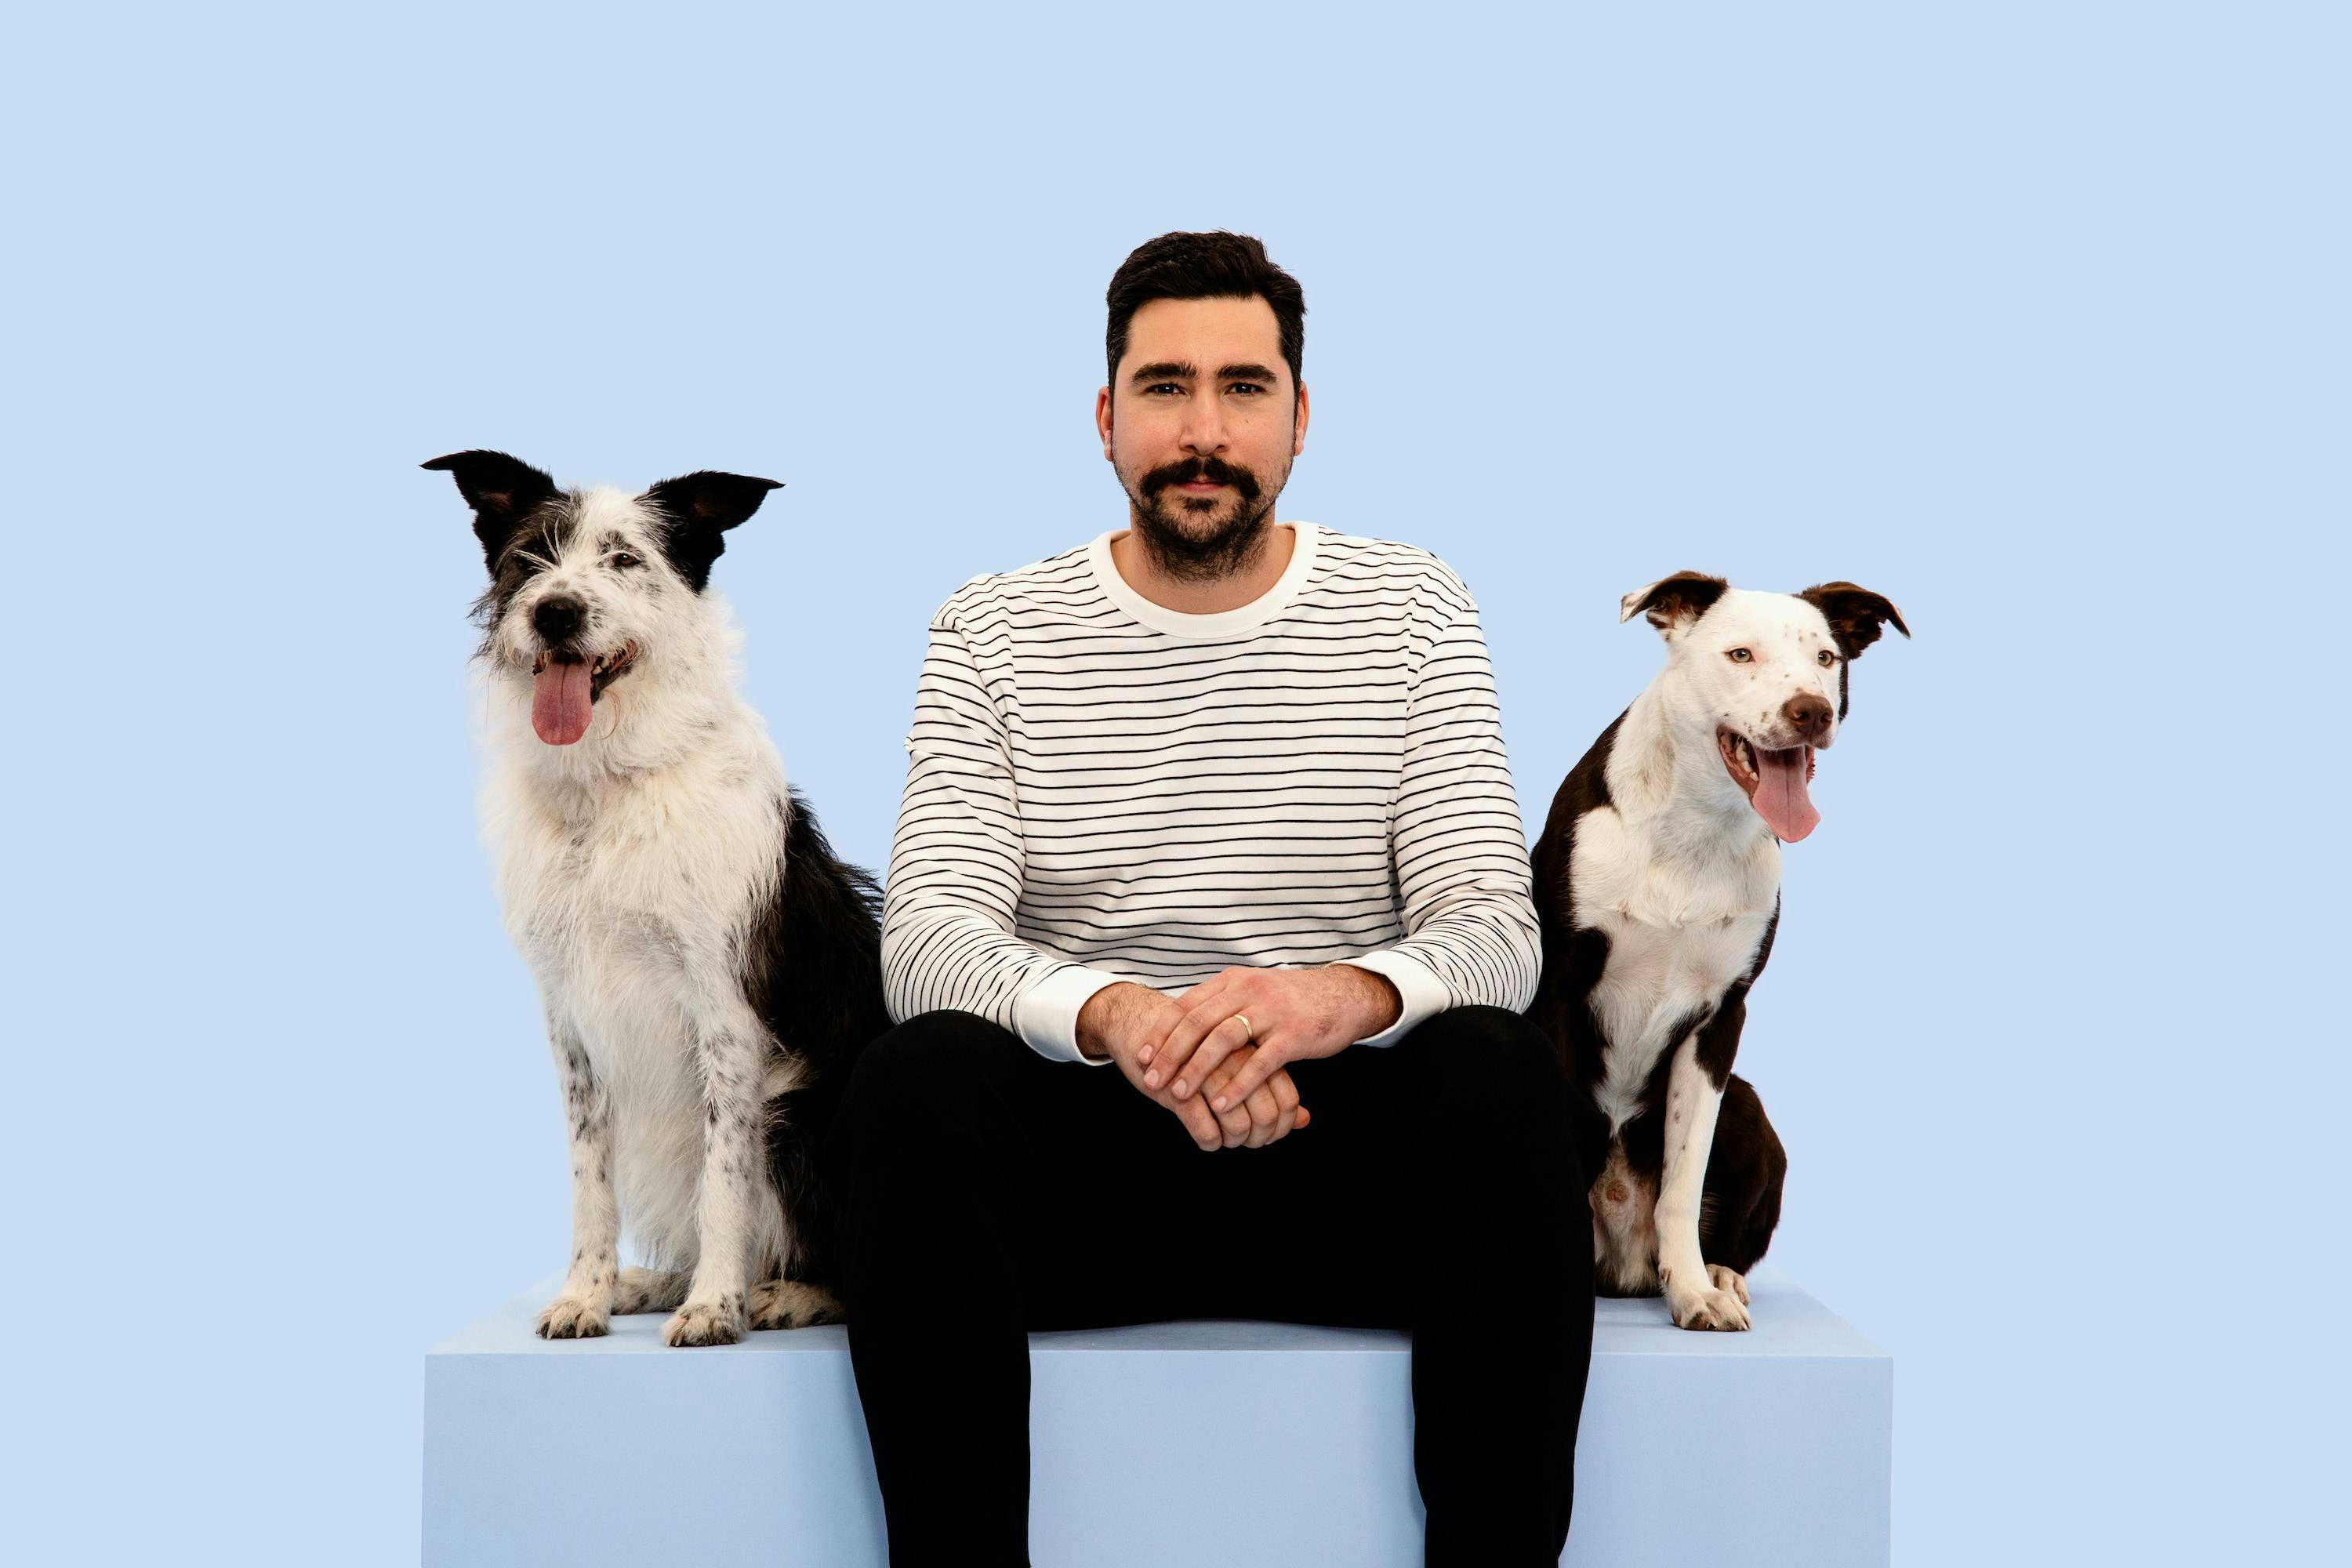 Man sitting between two dogs that might be relatives